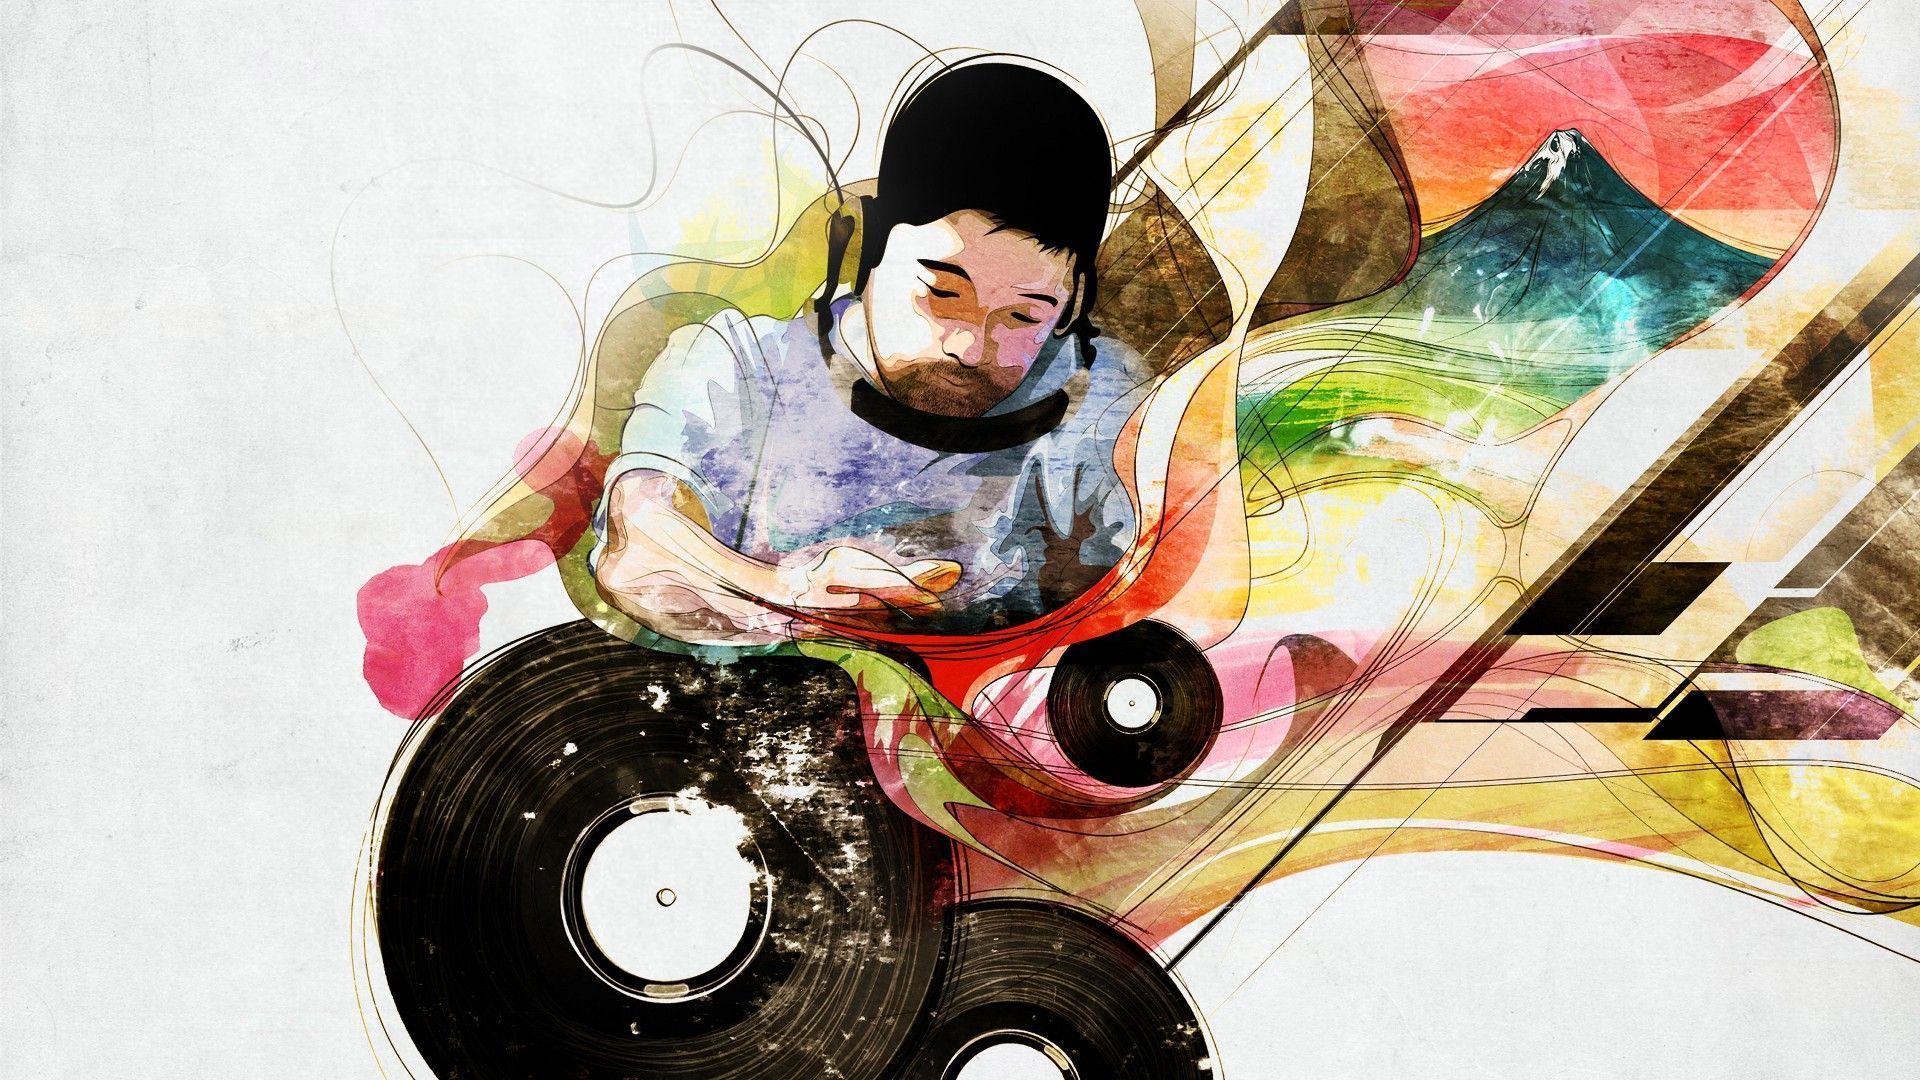 6 Nujabes HD Wallpapers Backgrounds - Wallpaper Abyss